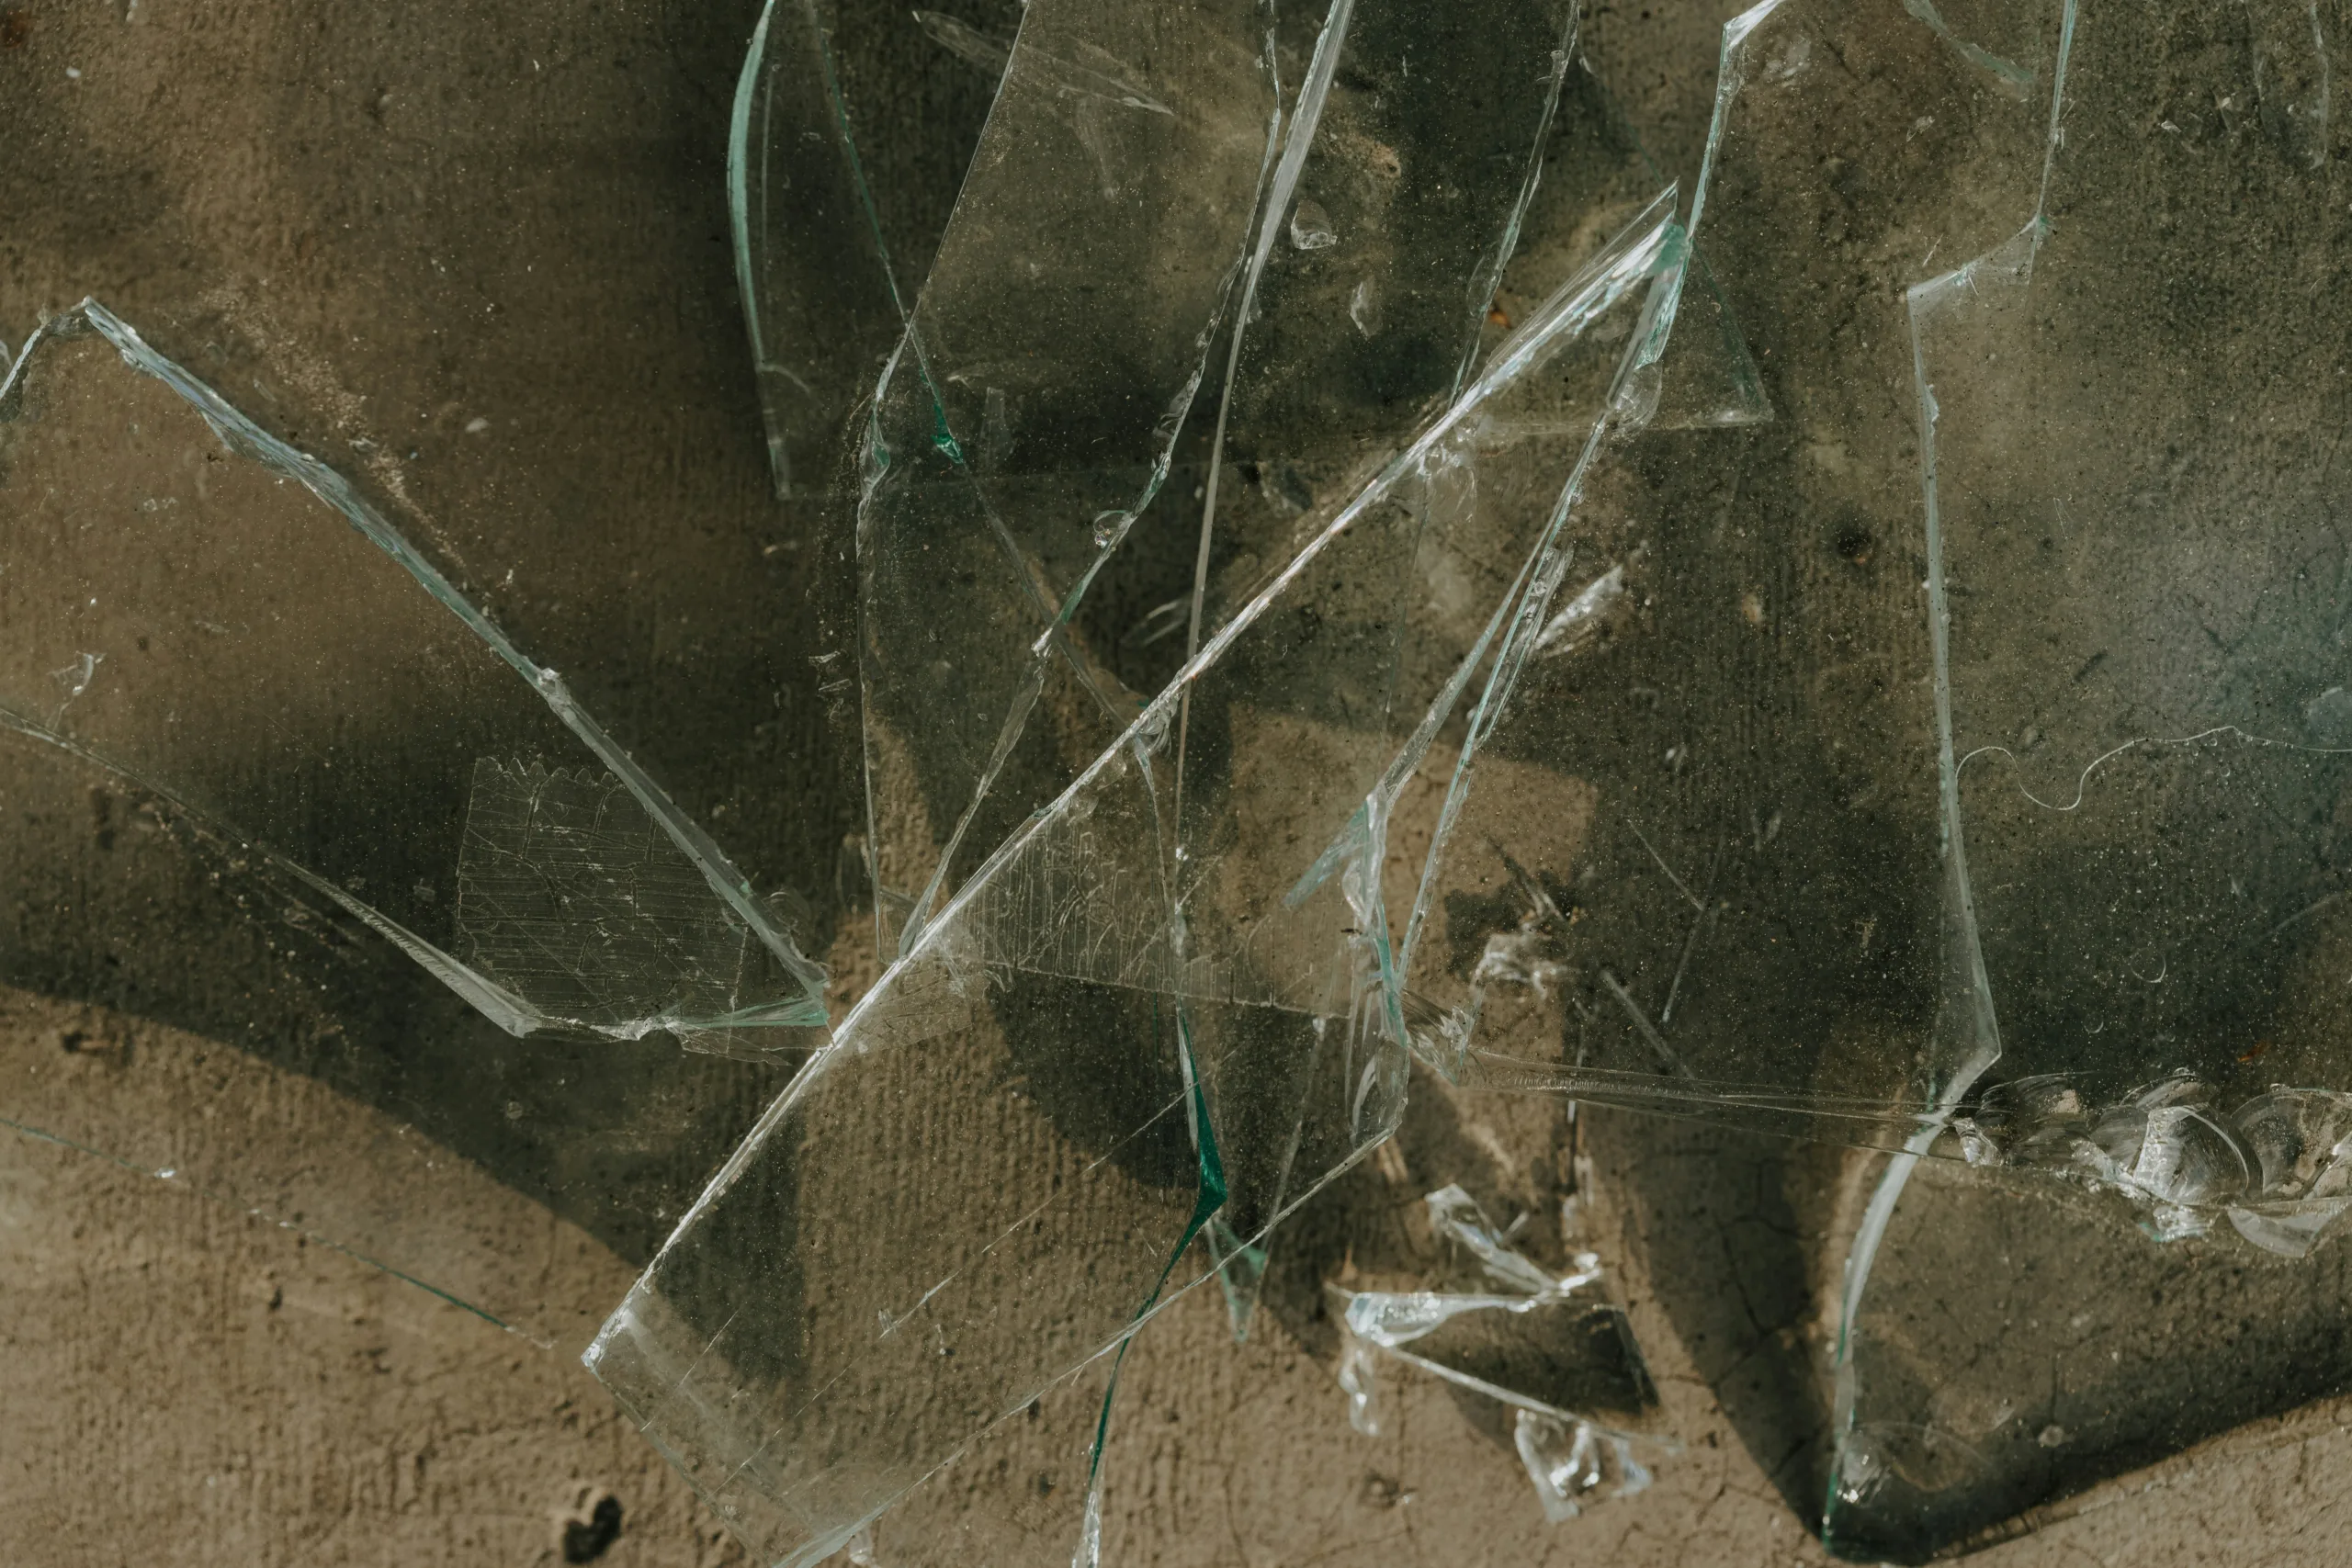 Close-up shot of shattered glass.